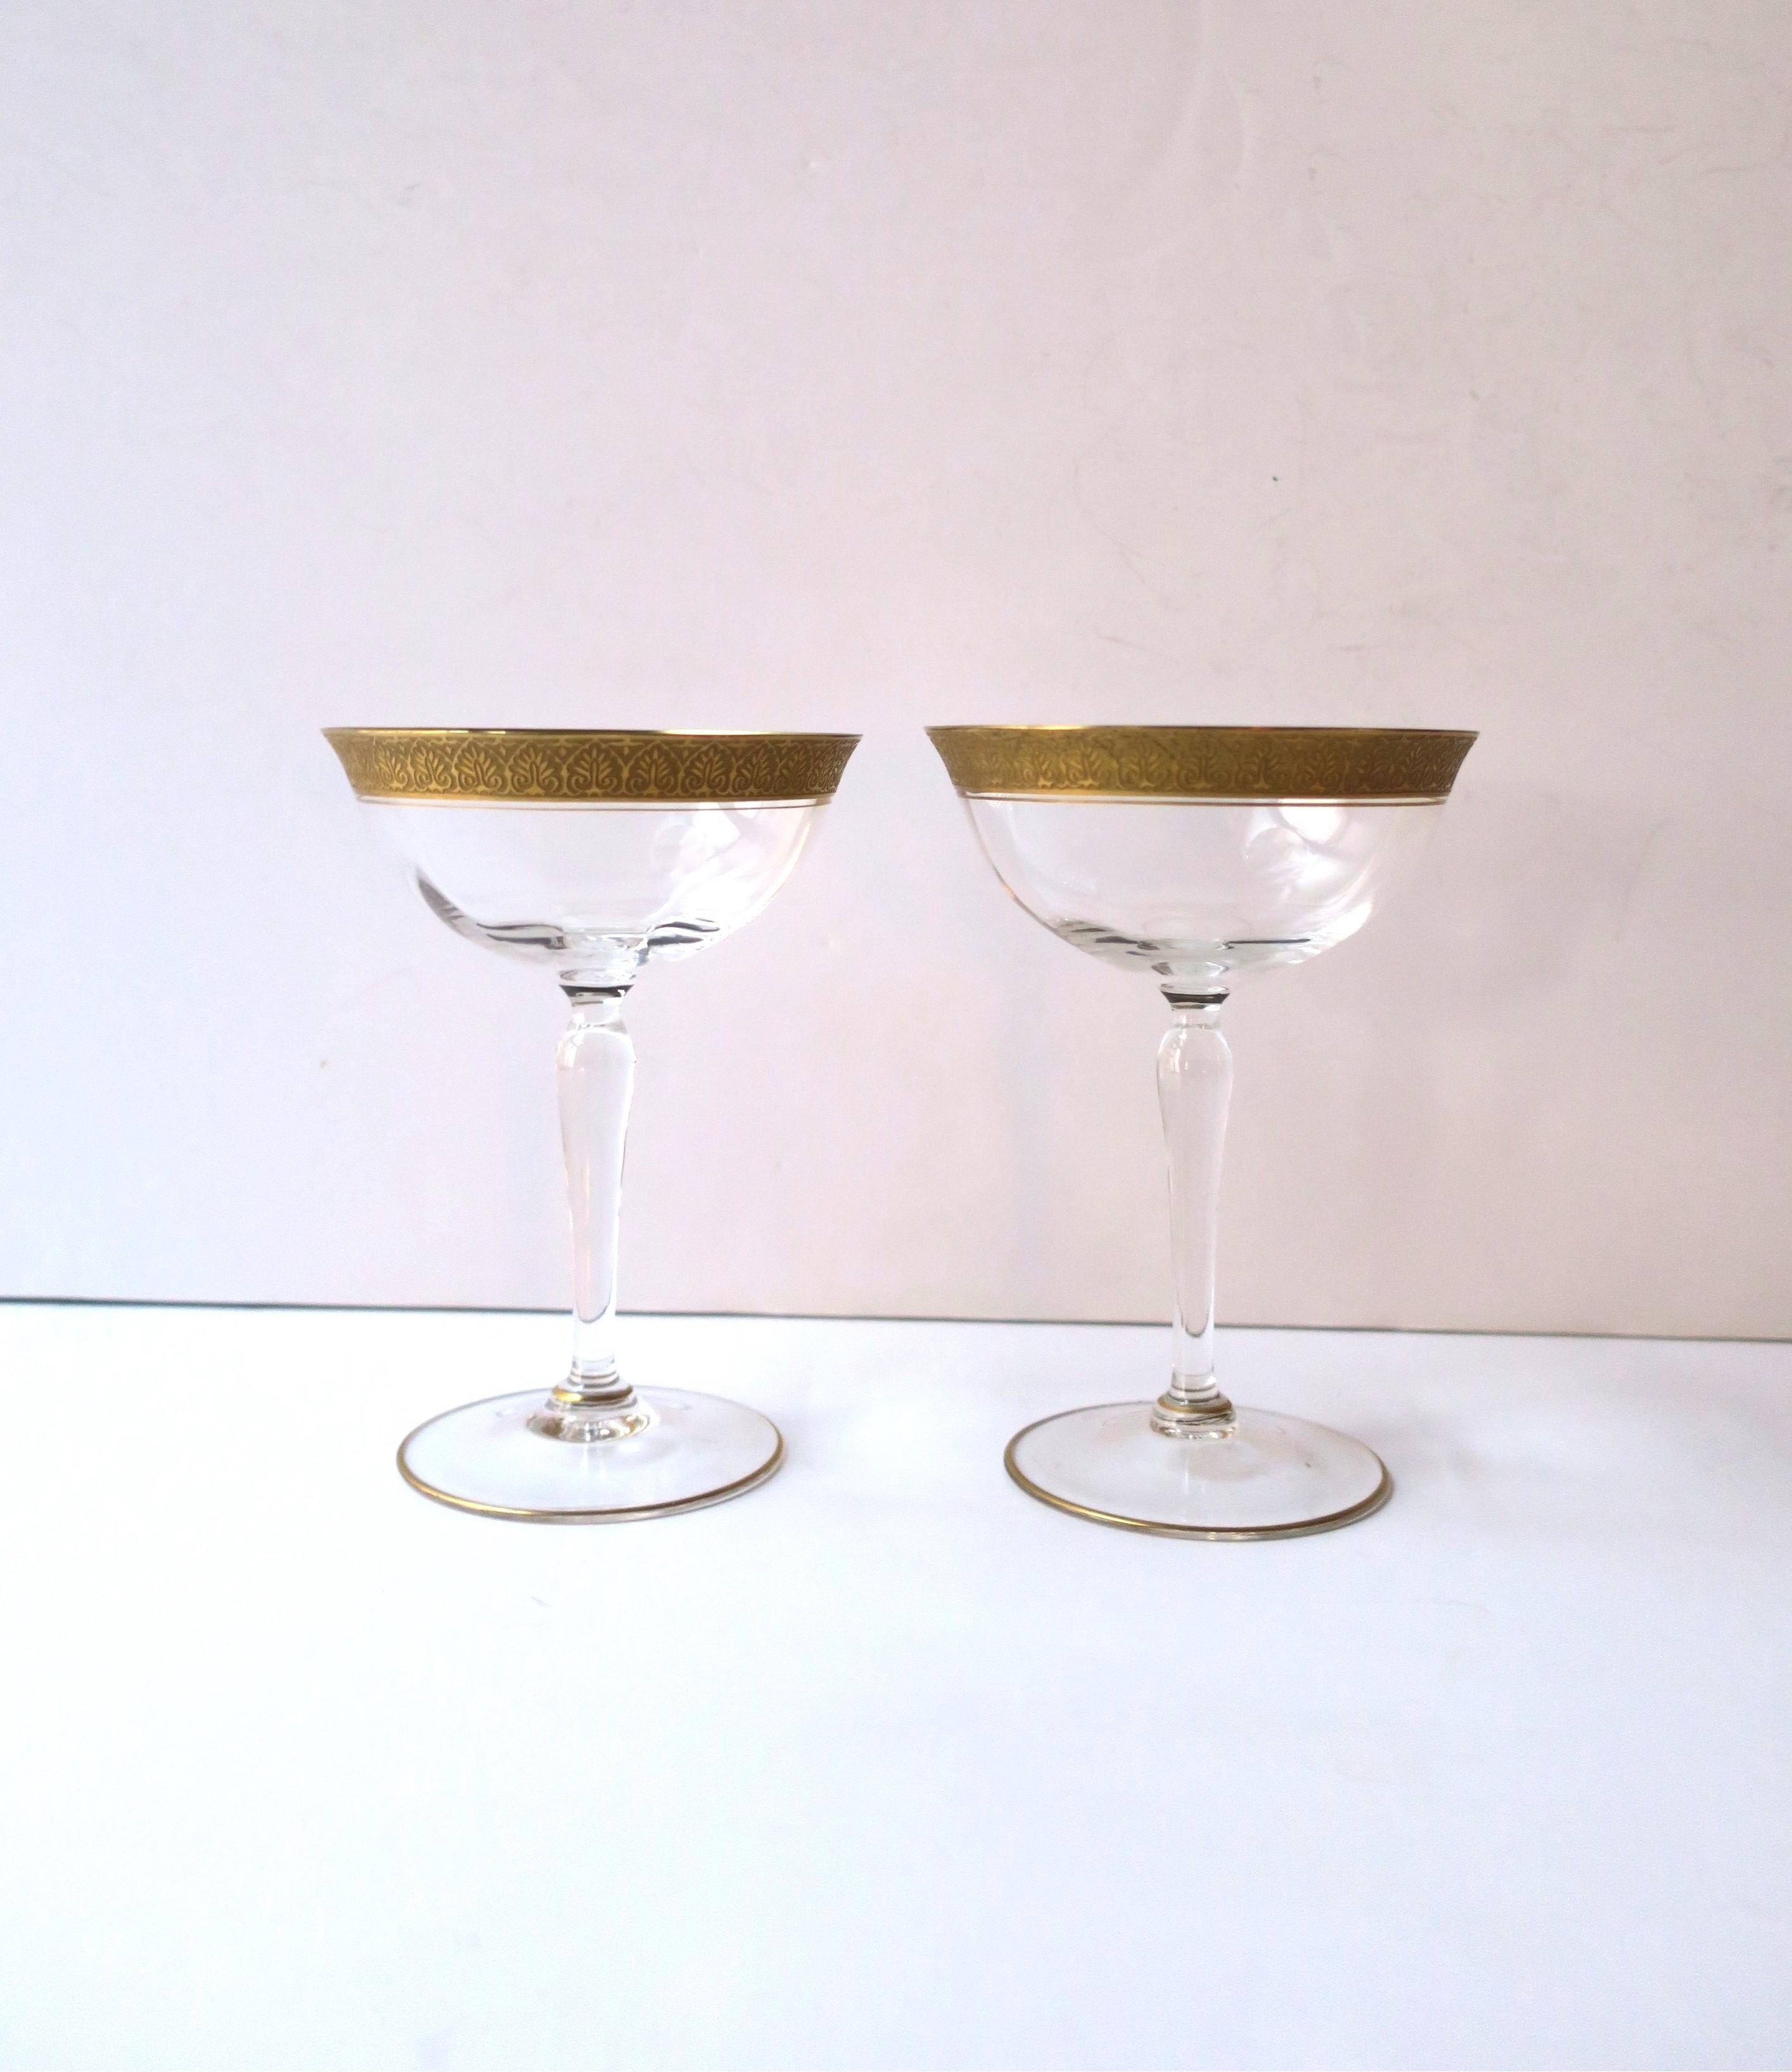 A beautiful pair of 22-karat gold rimmed Champagne or cocktail coupes glasses, circa early-20th century, Europe. Pair have a beautiful gold embossed exterior rim, gold interior rim, and thin gold edge around base. A beautiful set to enjoy Champagne